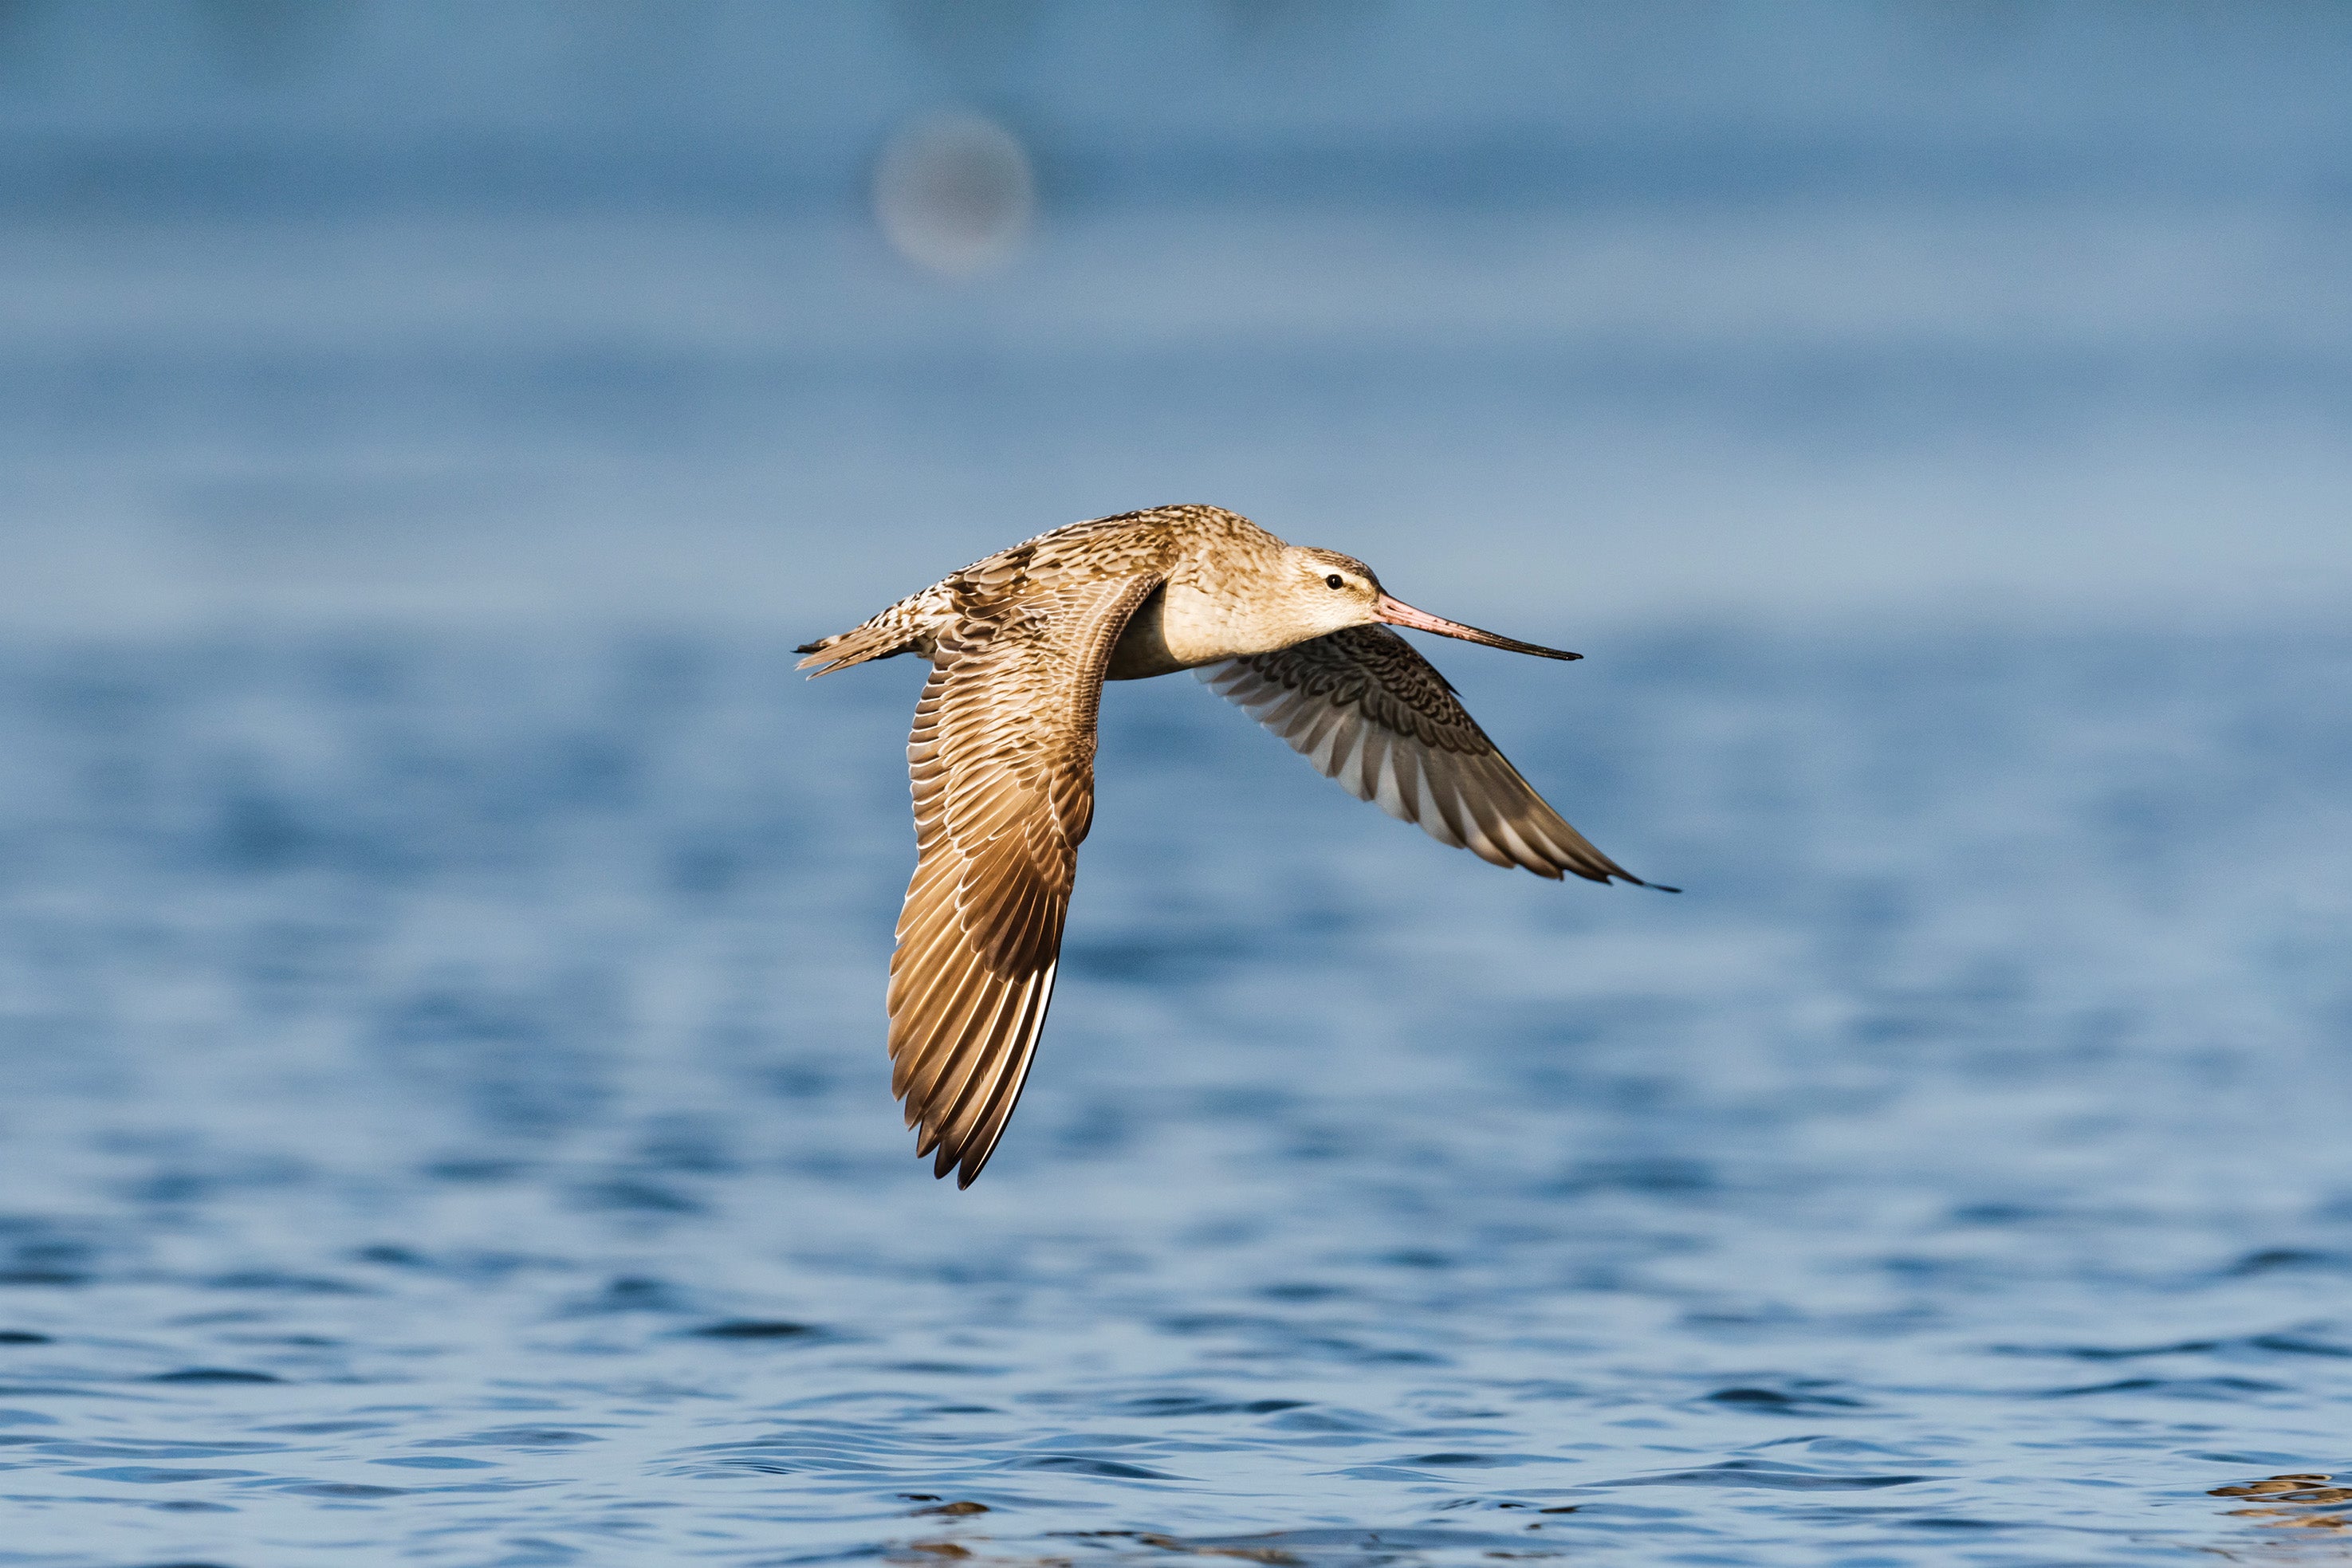 A brown bird flying over water.